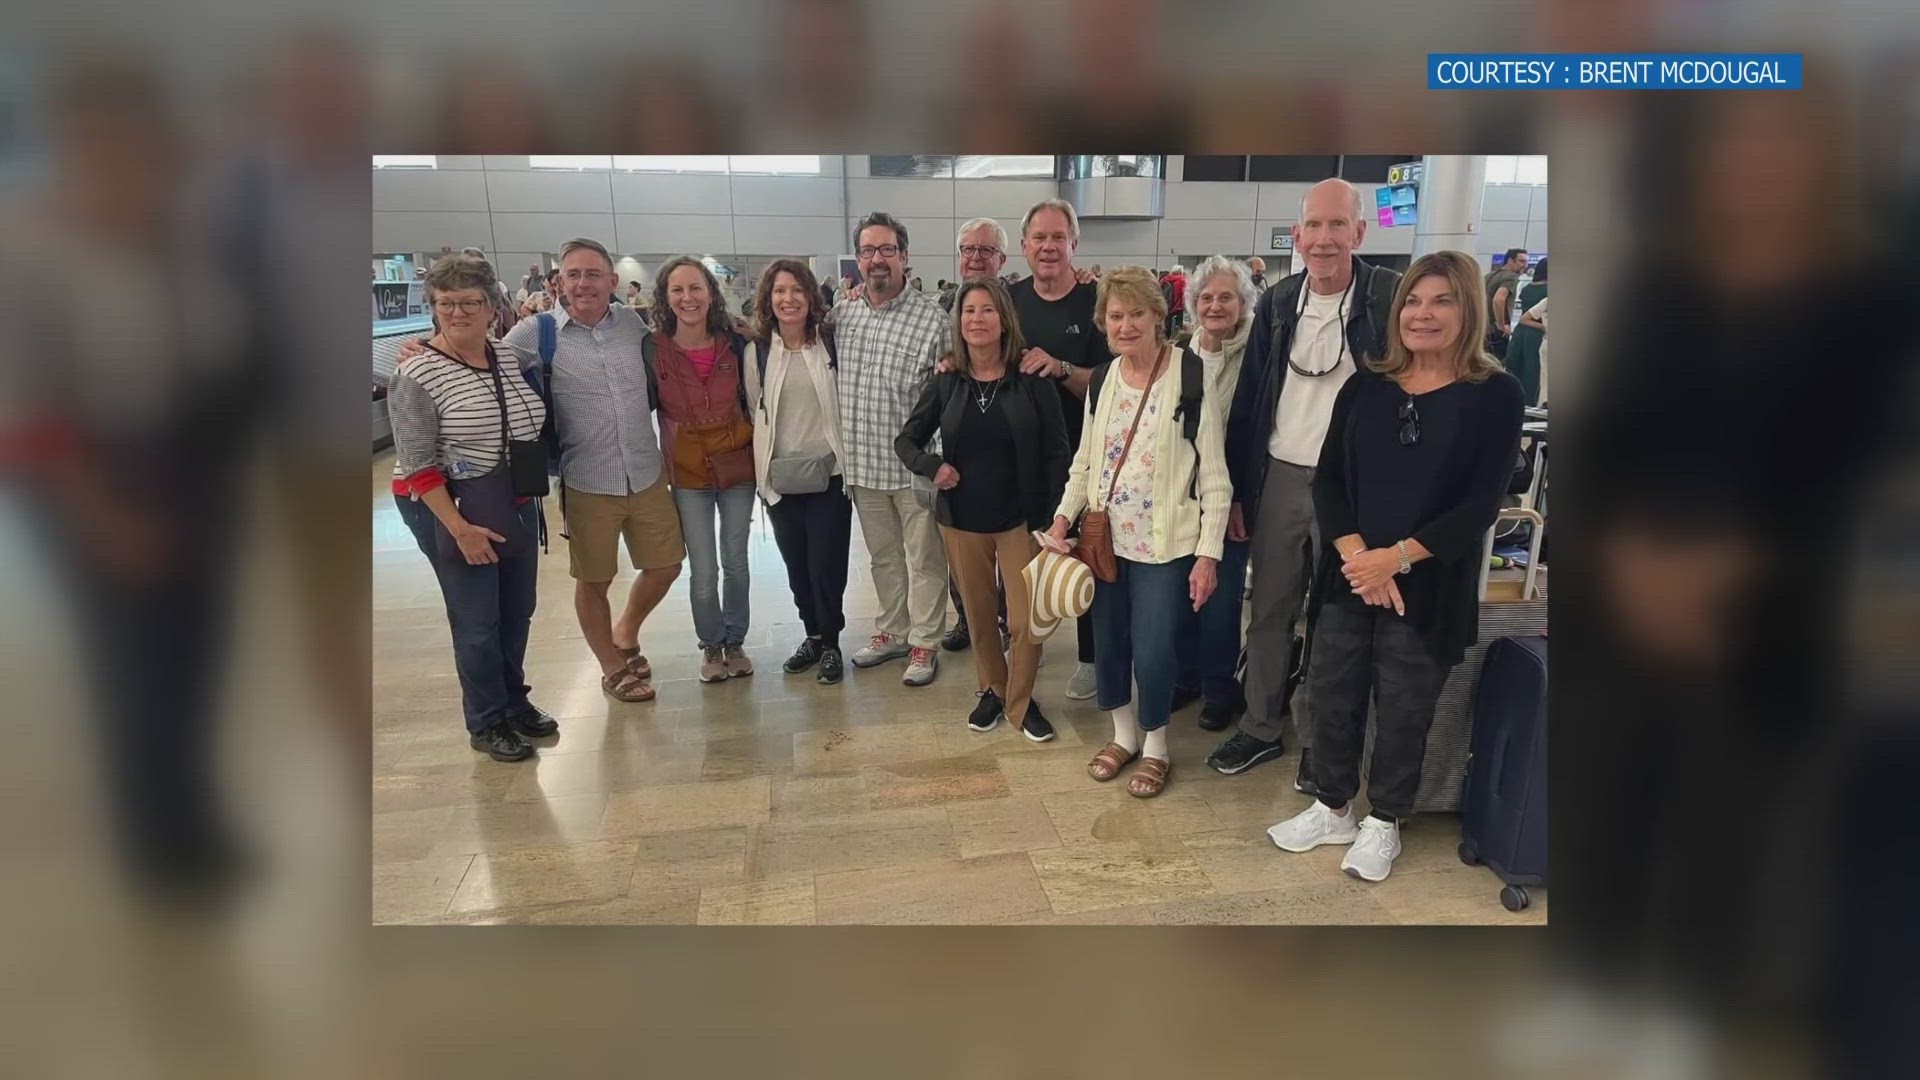 Several members of the First Baptist Church in Knoxville are in Israel right now. We spoke earlier with the church's pastor who says they are in a safe place.